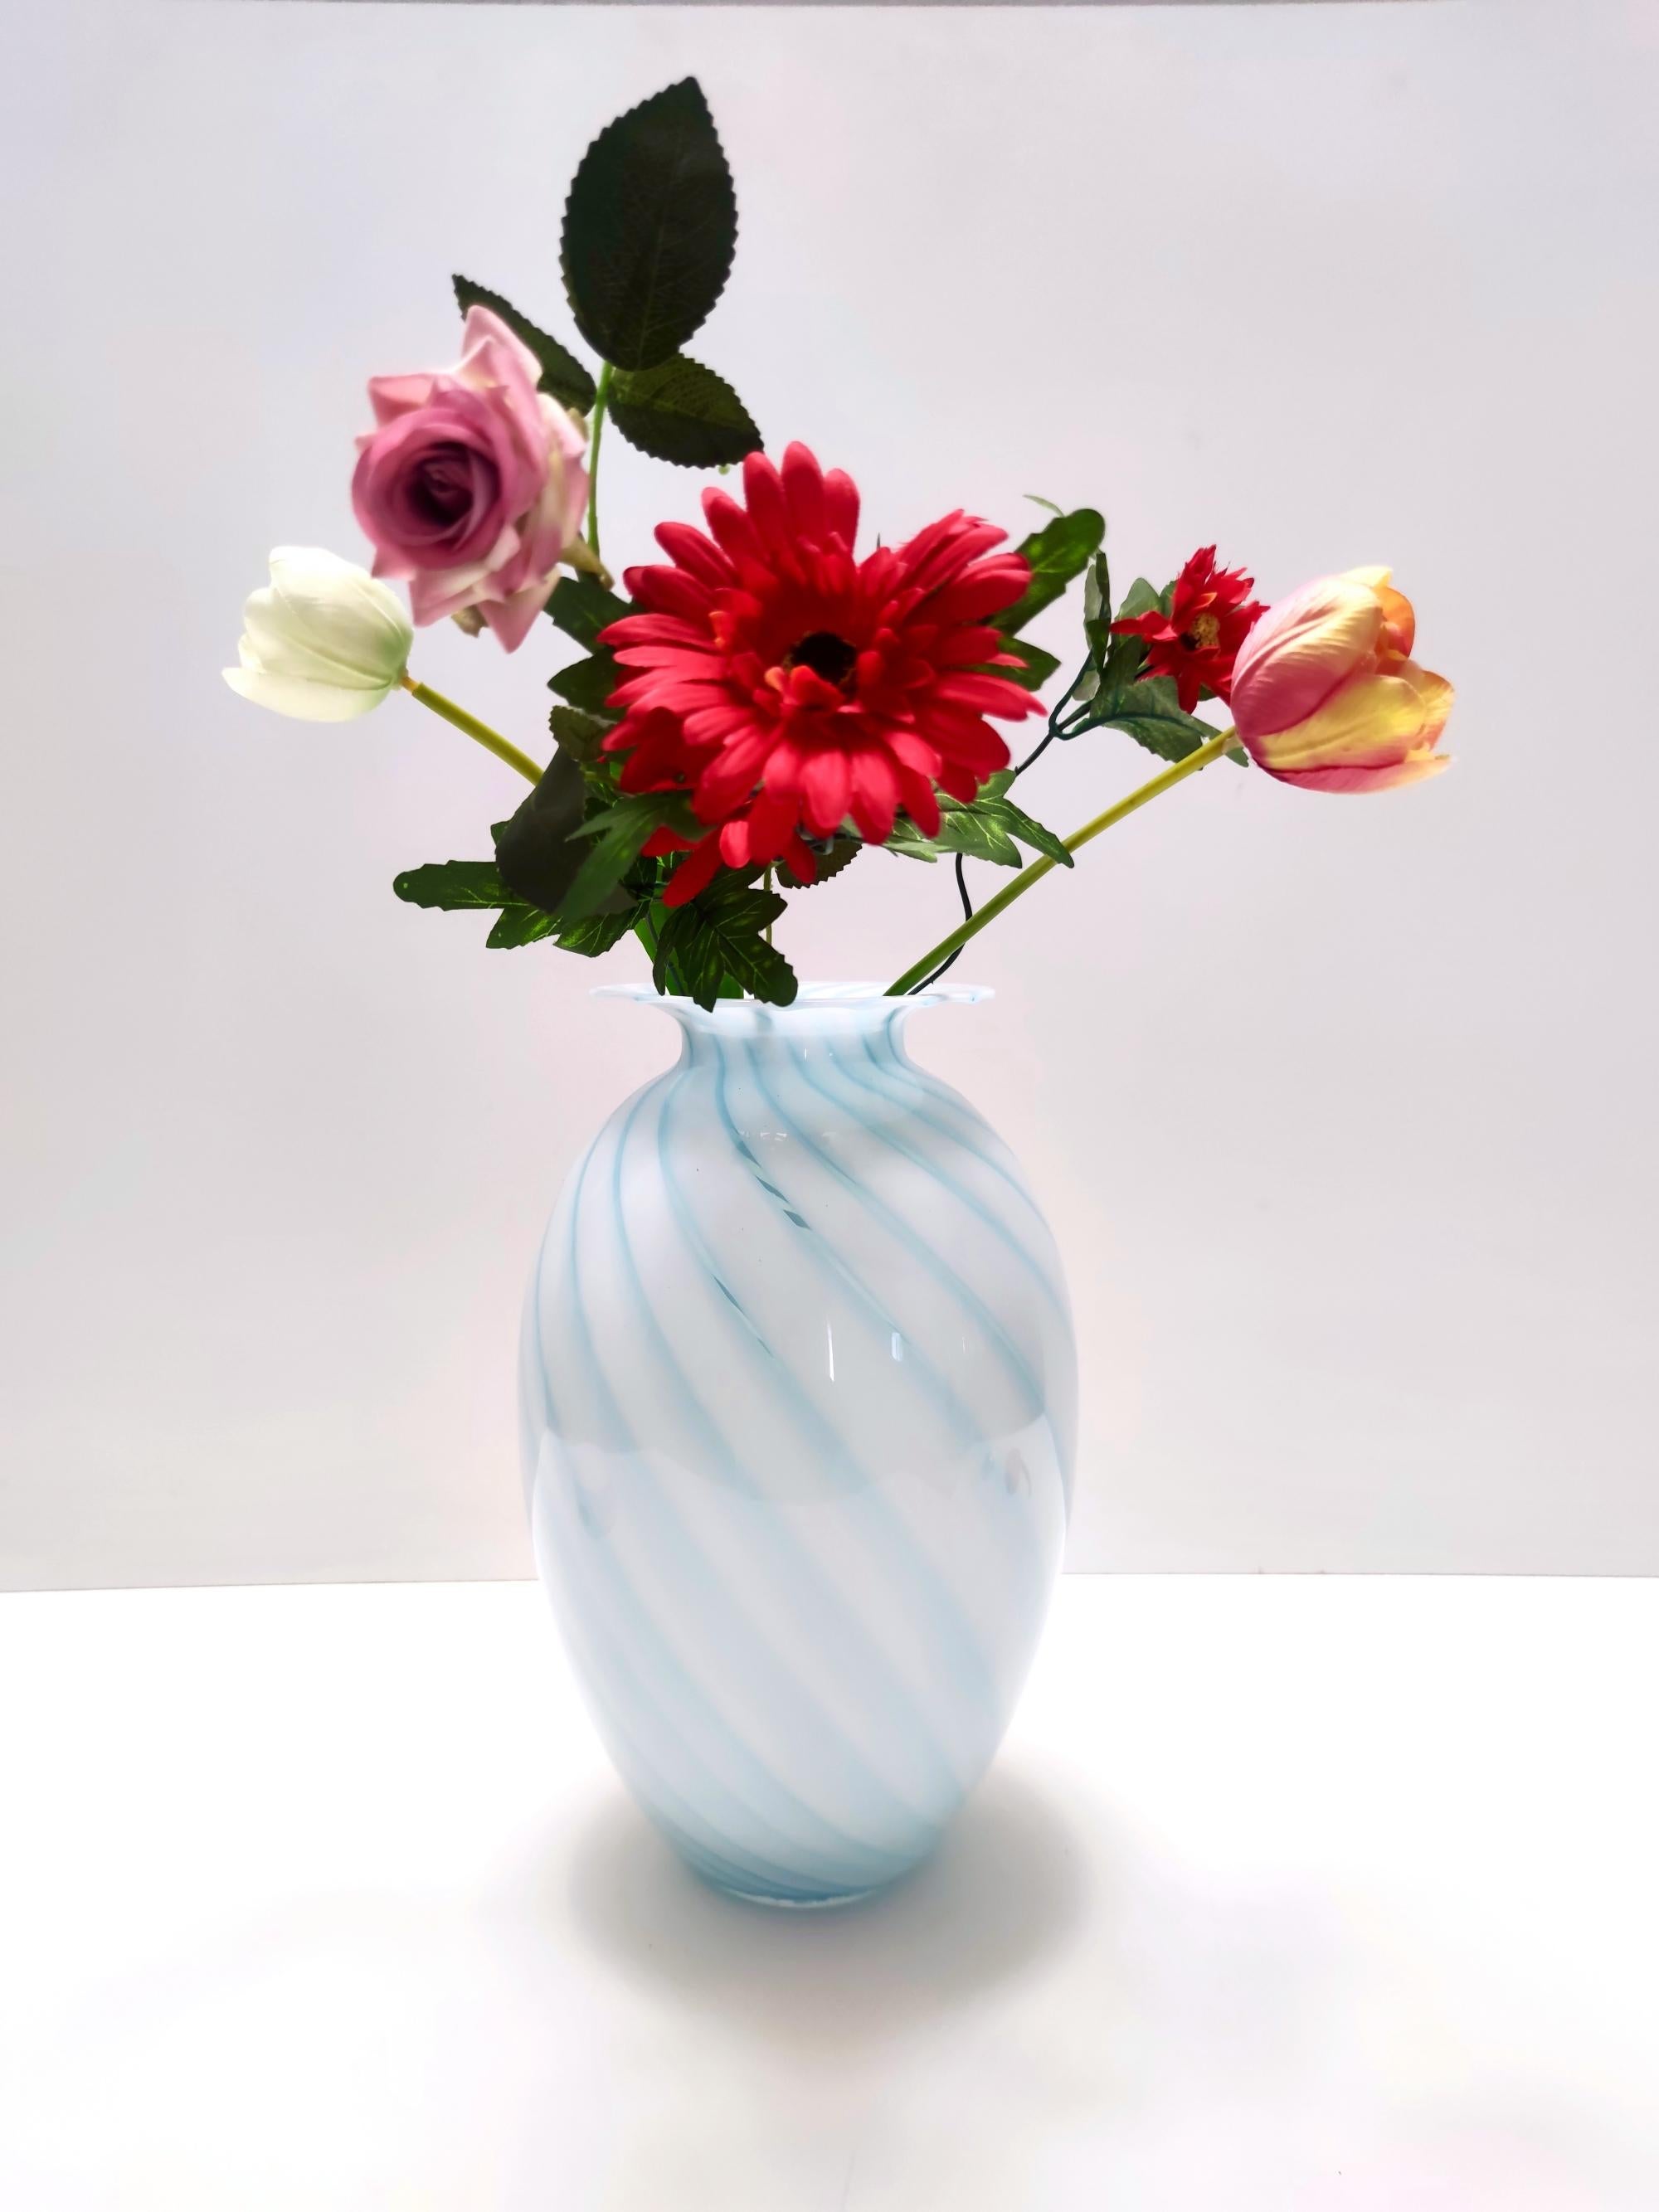 Made in Italy, 1970s.
This vase is made in Murano glass and features light blue and white canes.
This decanter is a vintage item, therefore it might show slight traces of use, but it can be considered as in excellent original condition and ready to